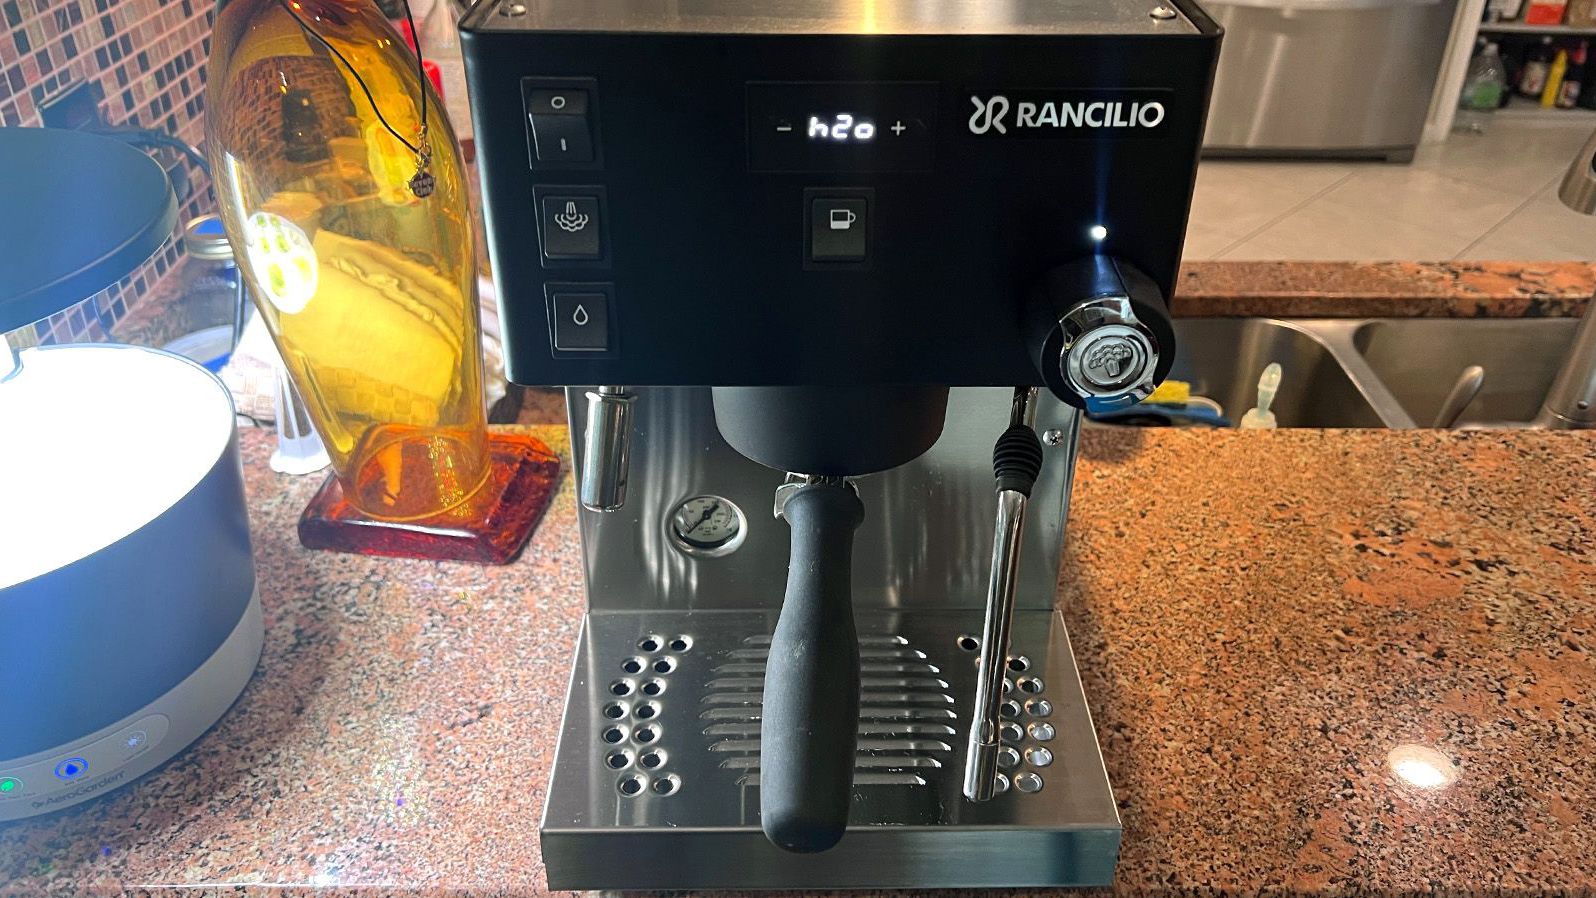 Delonghi Magnifica S review: Easy to learn, easy to master